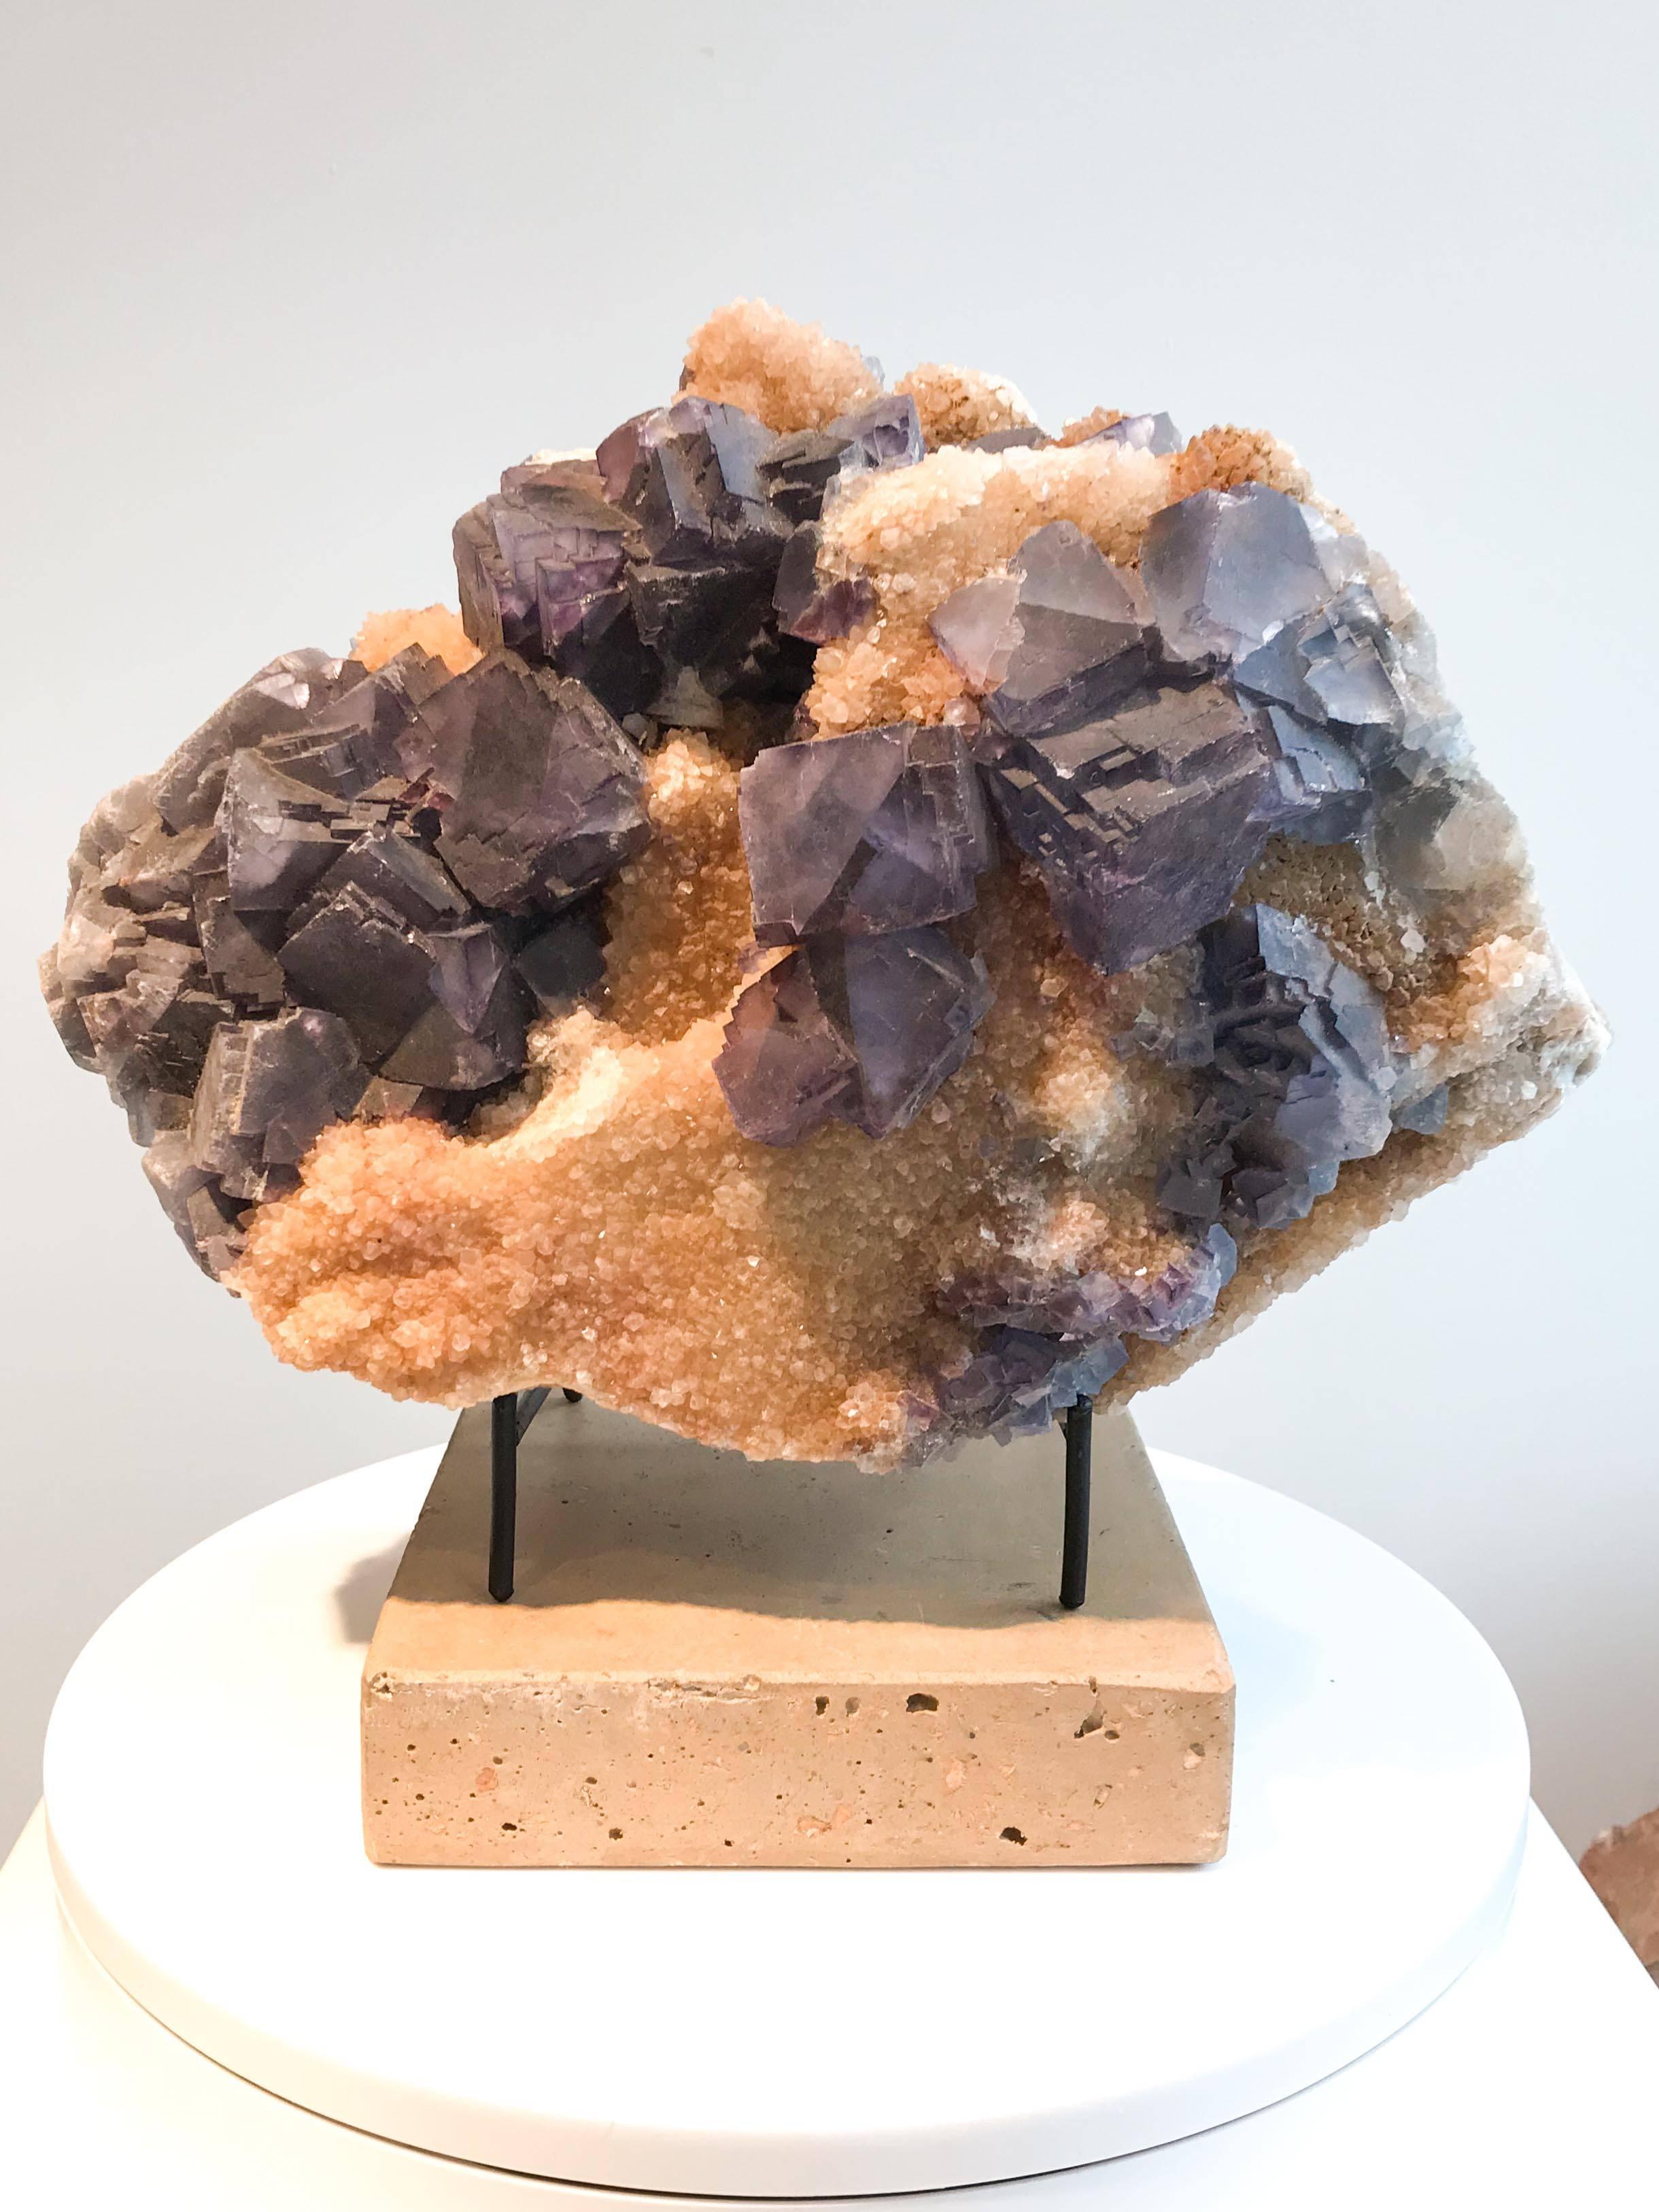 Fluorite on quartz specimen from an Illinois fluorite mine. Quartz is thought to focus and amplify positive information and energies. Includes stand and plinth.